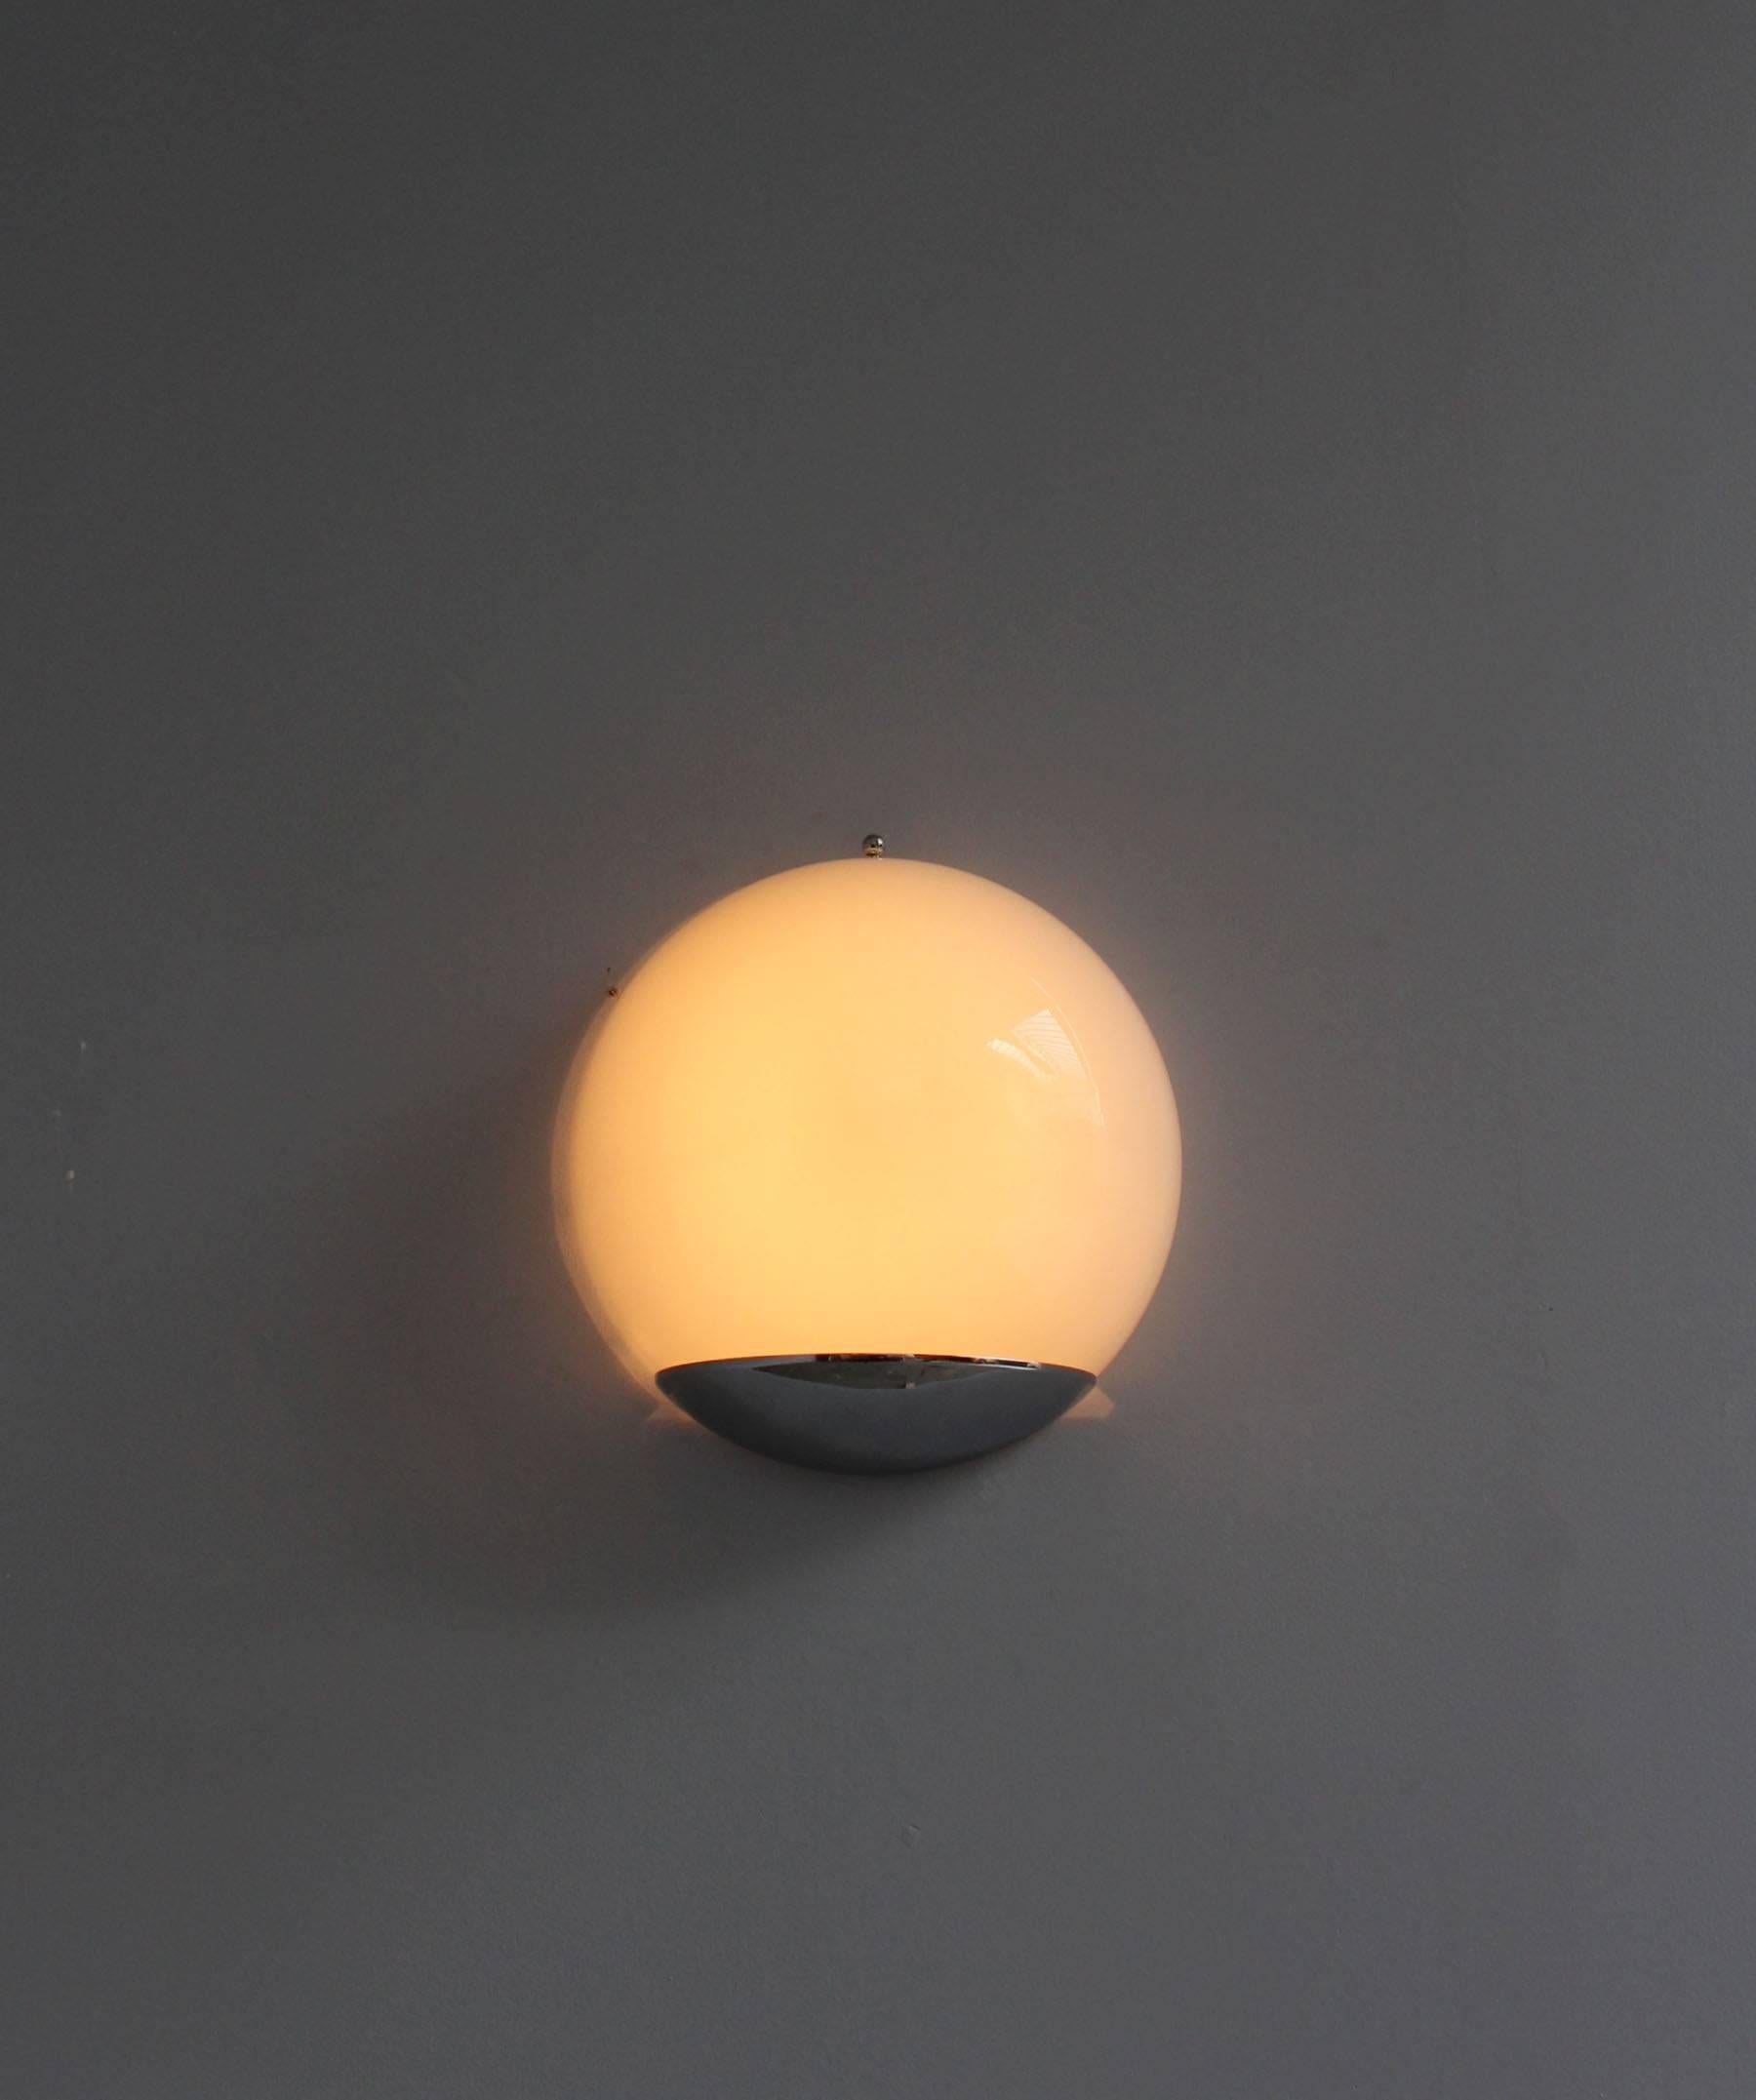 Jean Perzel : A fine French Art Deco wall light with a half sphere enameled glass diffuser mounted on a chrome base.